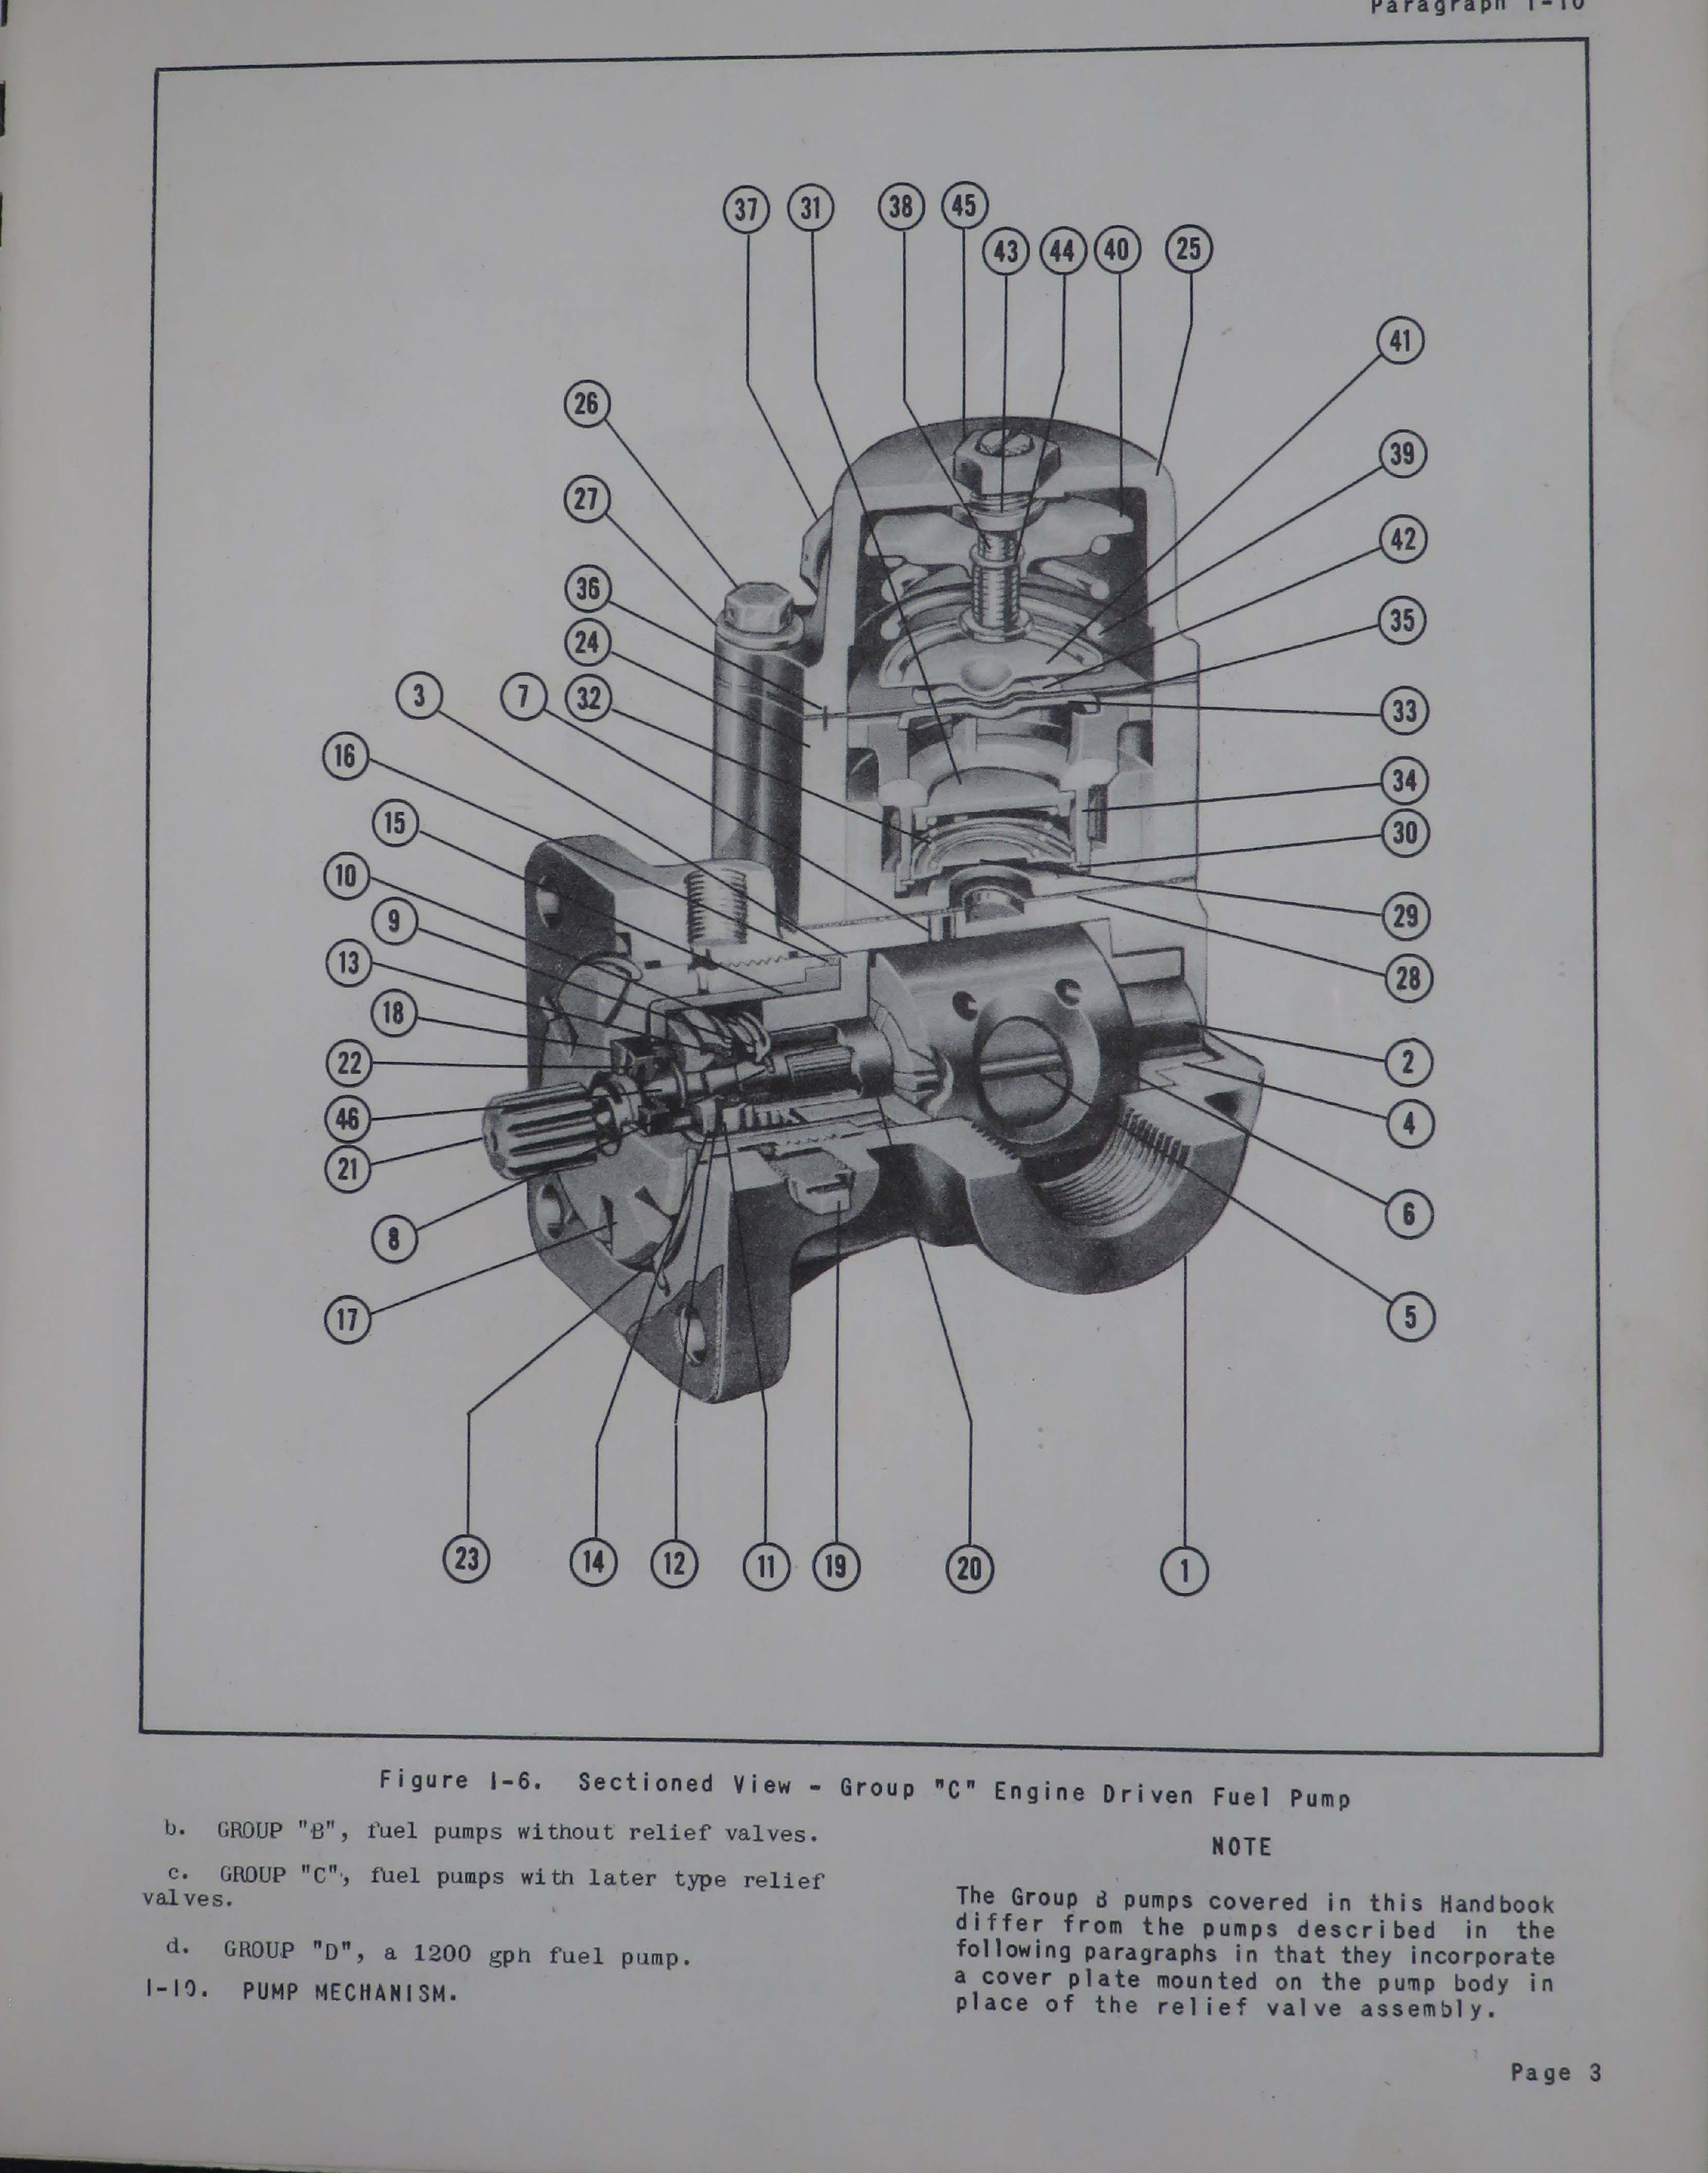 Sample page 7 from AirCorps Library document: Operation, Maintenance and Overhaul for Engine Driven Fuel Pumps 